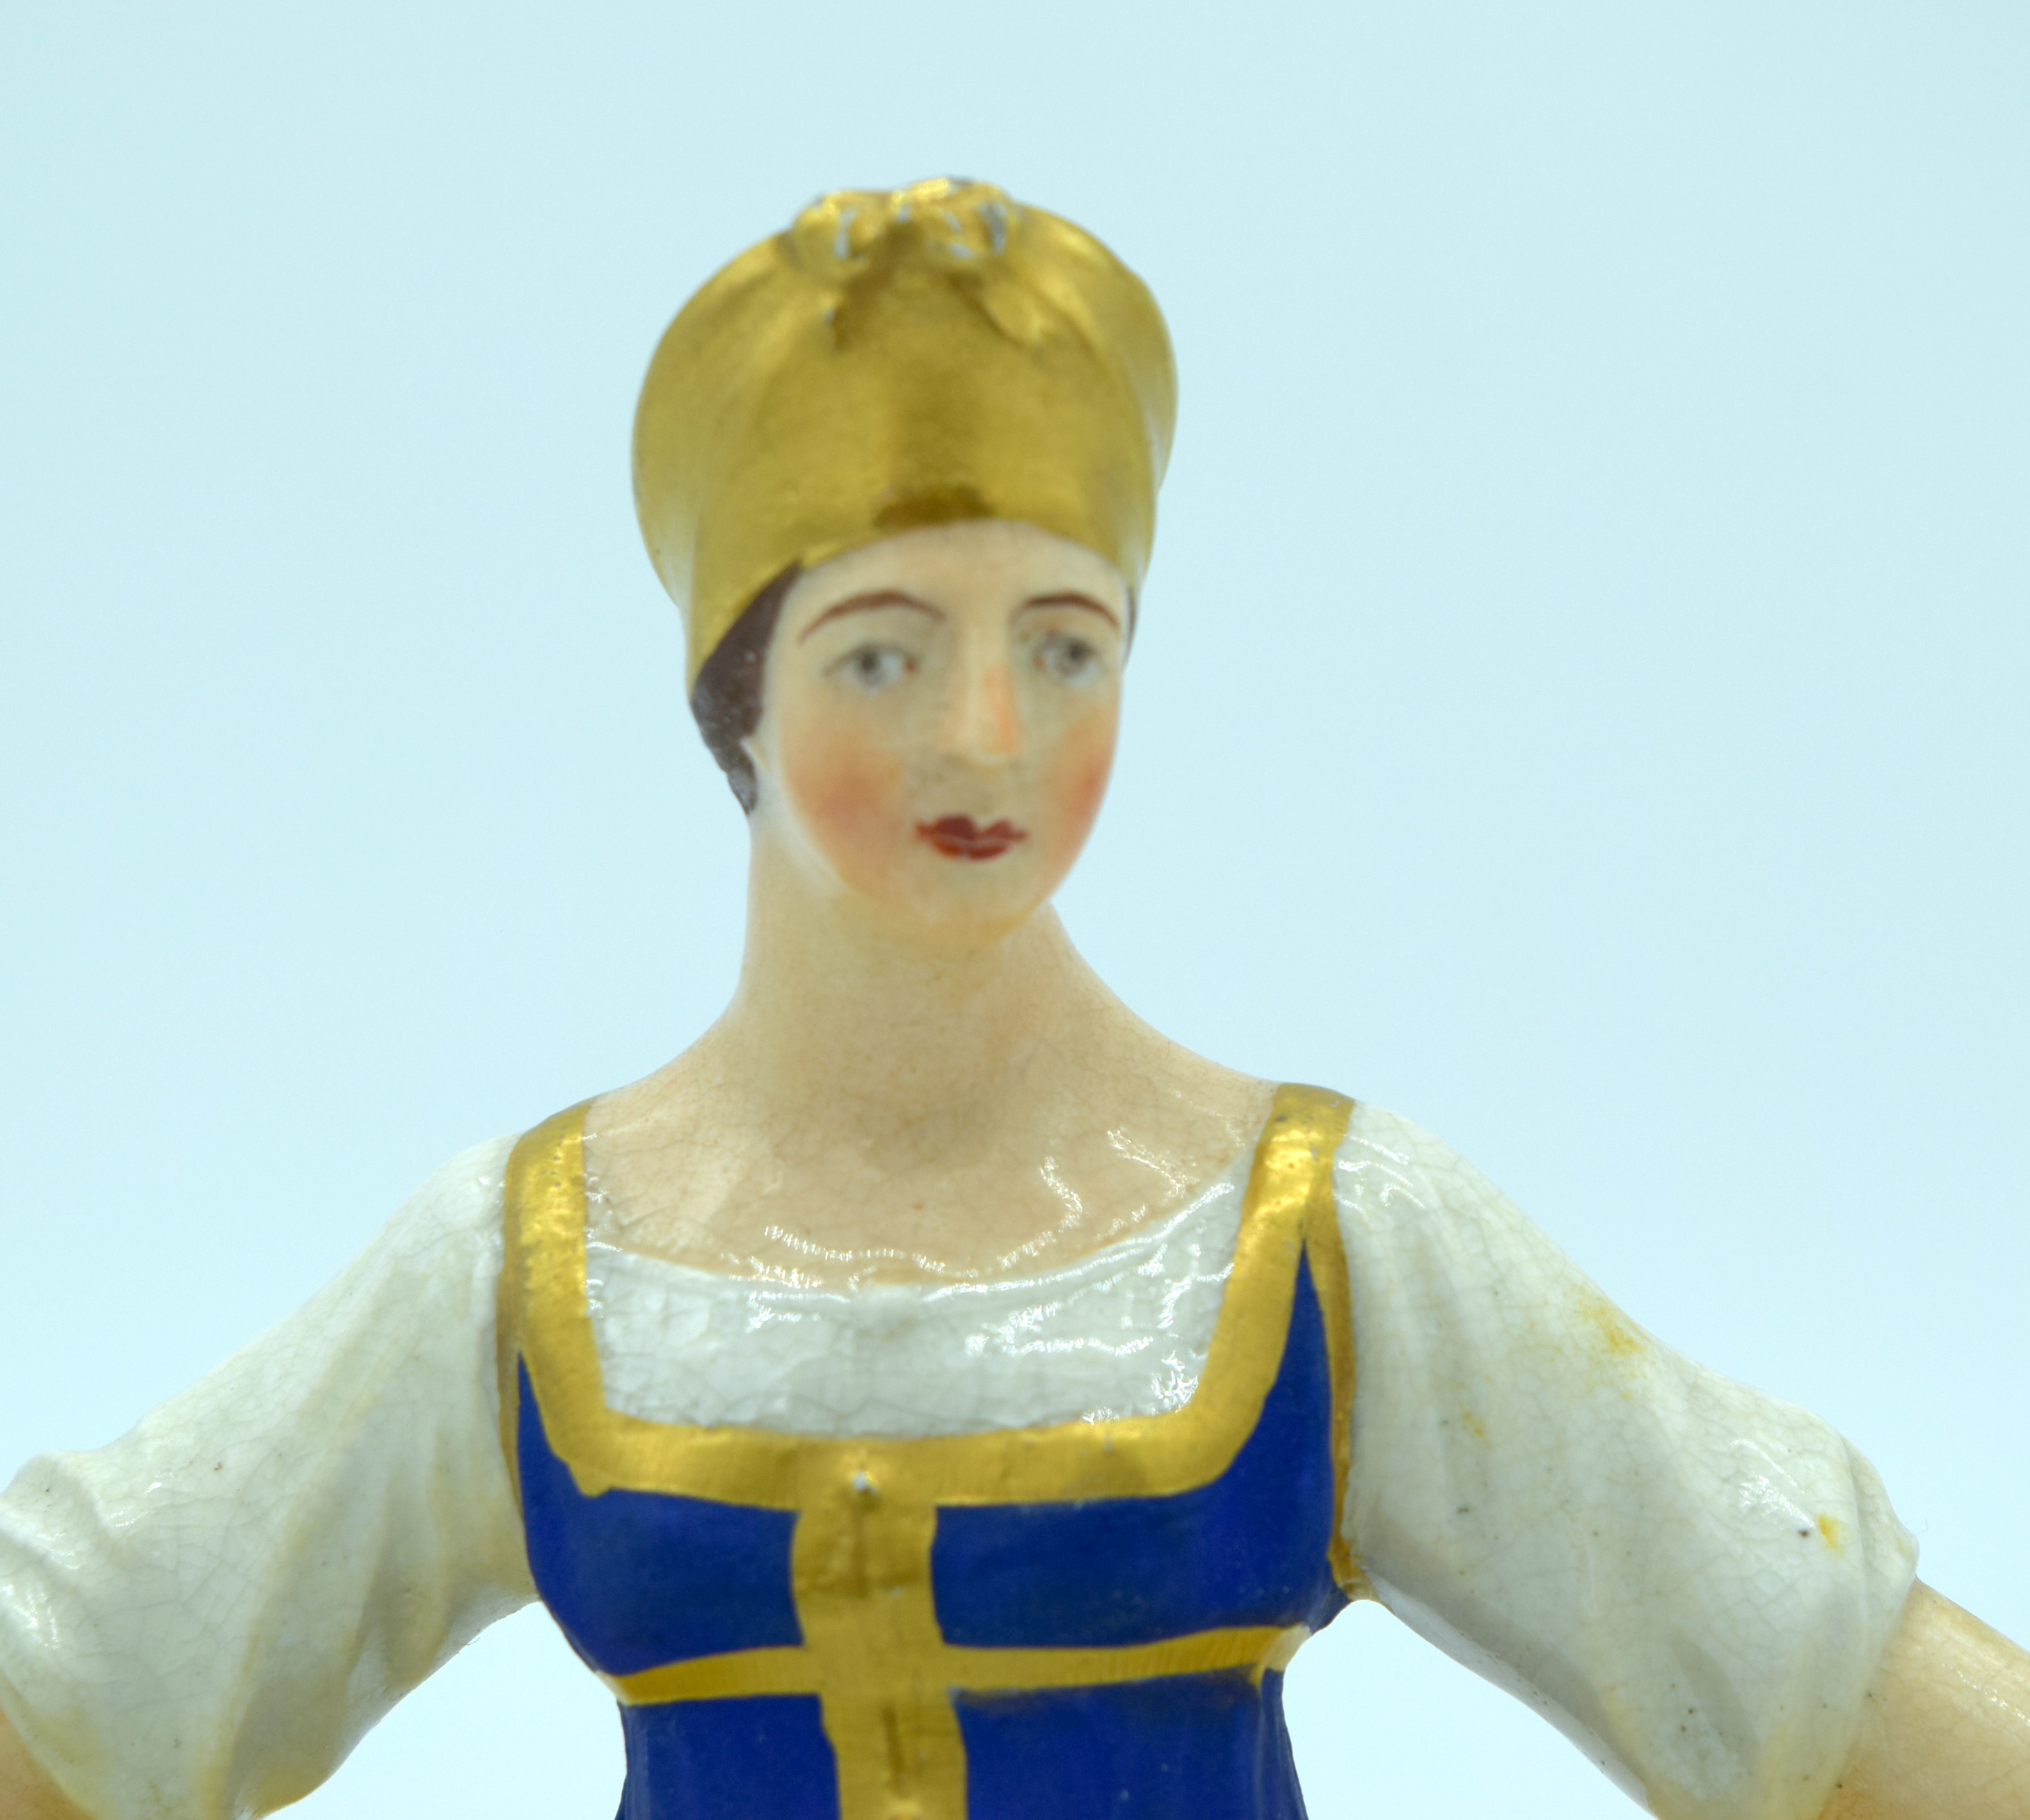 A VERY RARE EARLY 19TH CENTURY RUSSIAN PORCELAIN FIGURE OF A WOMEN probably Gardner Factory, Verbilk - Image 6 of 10